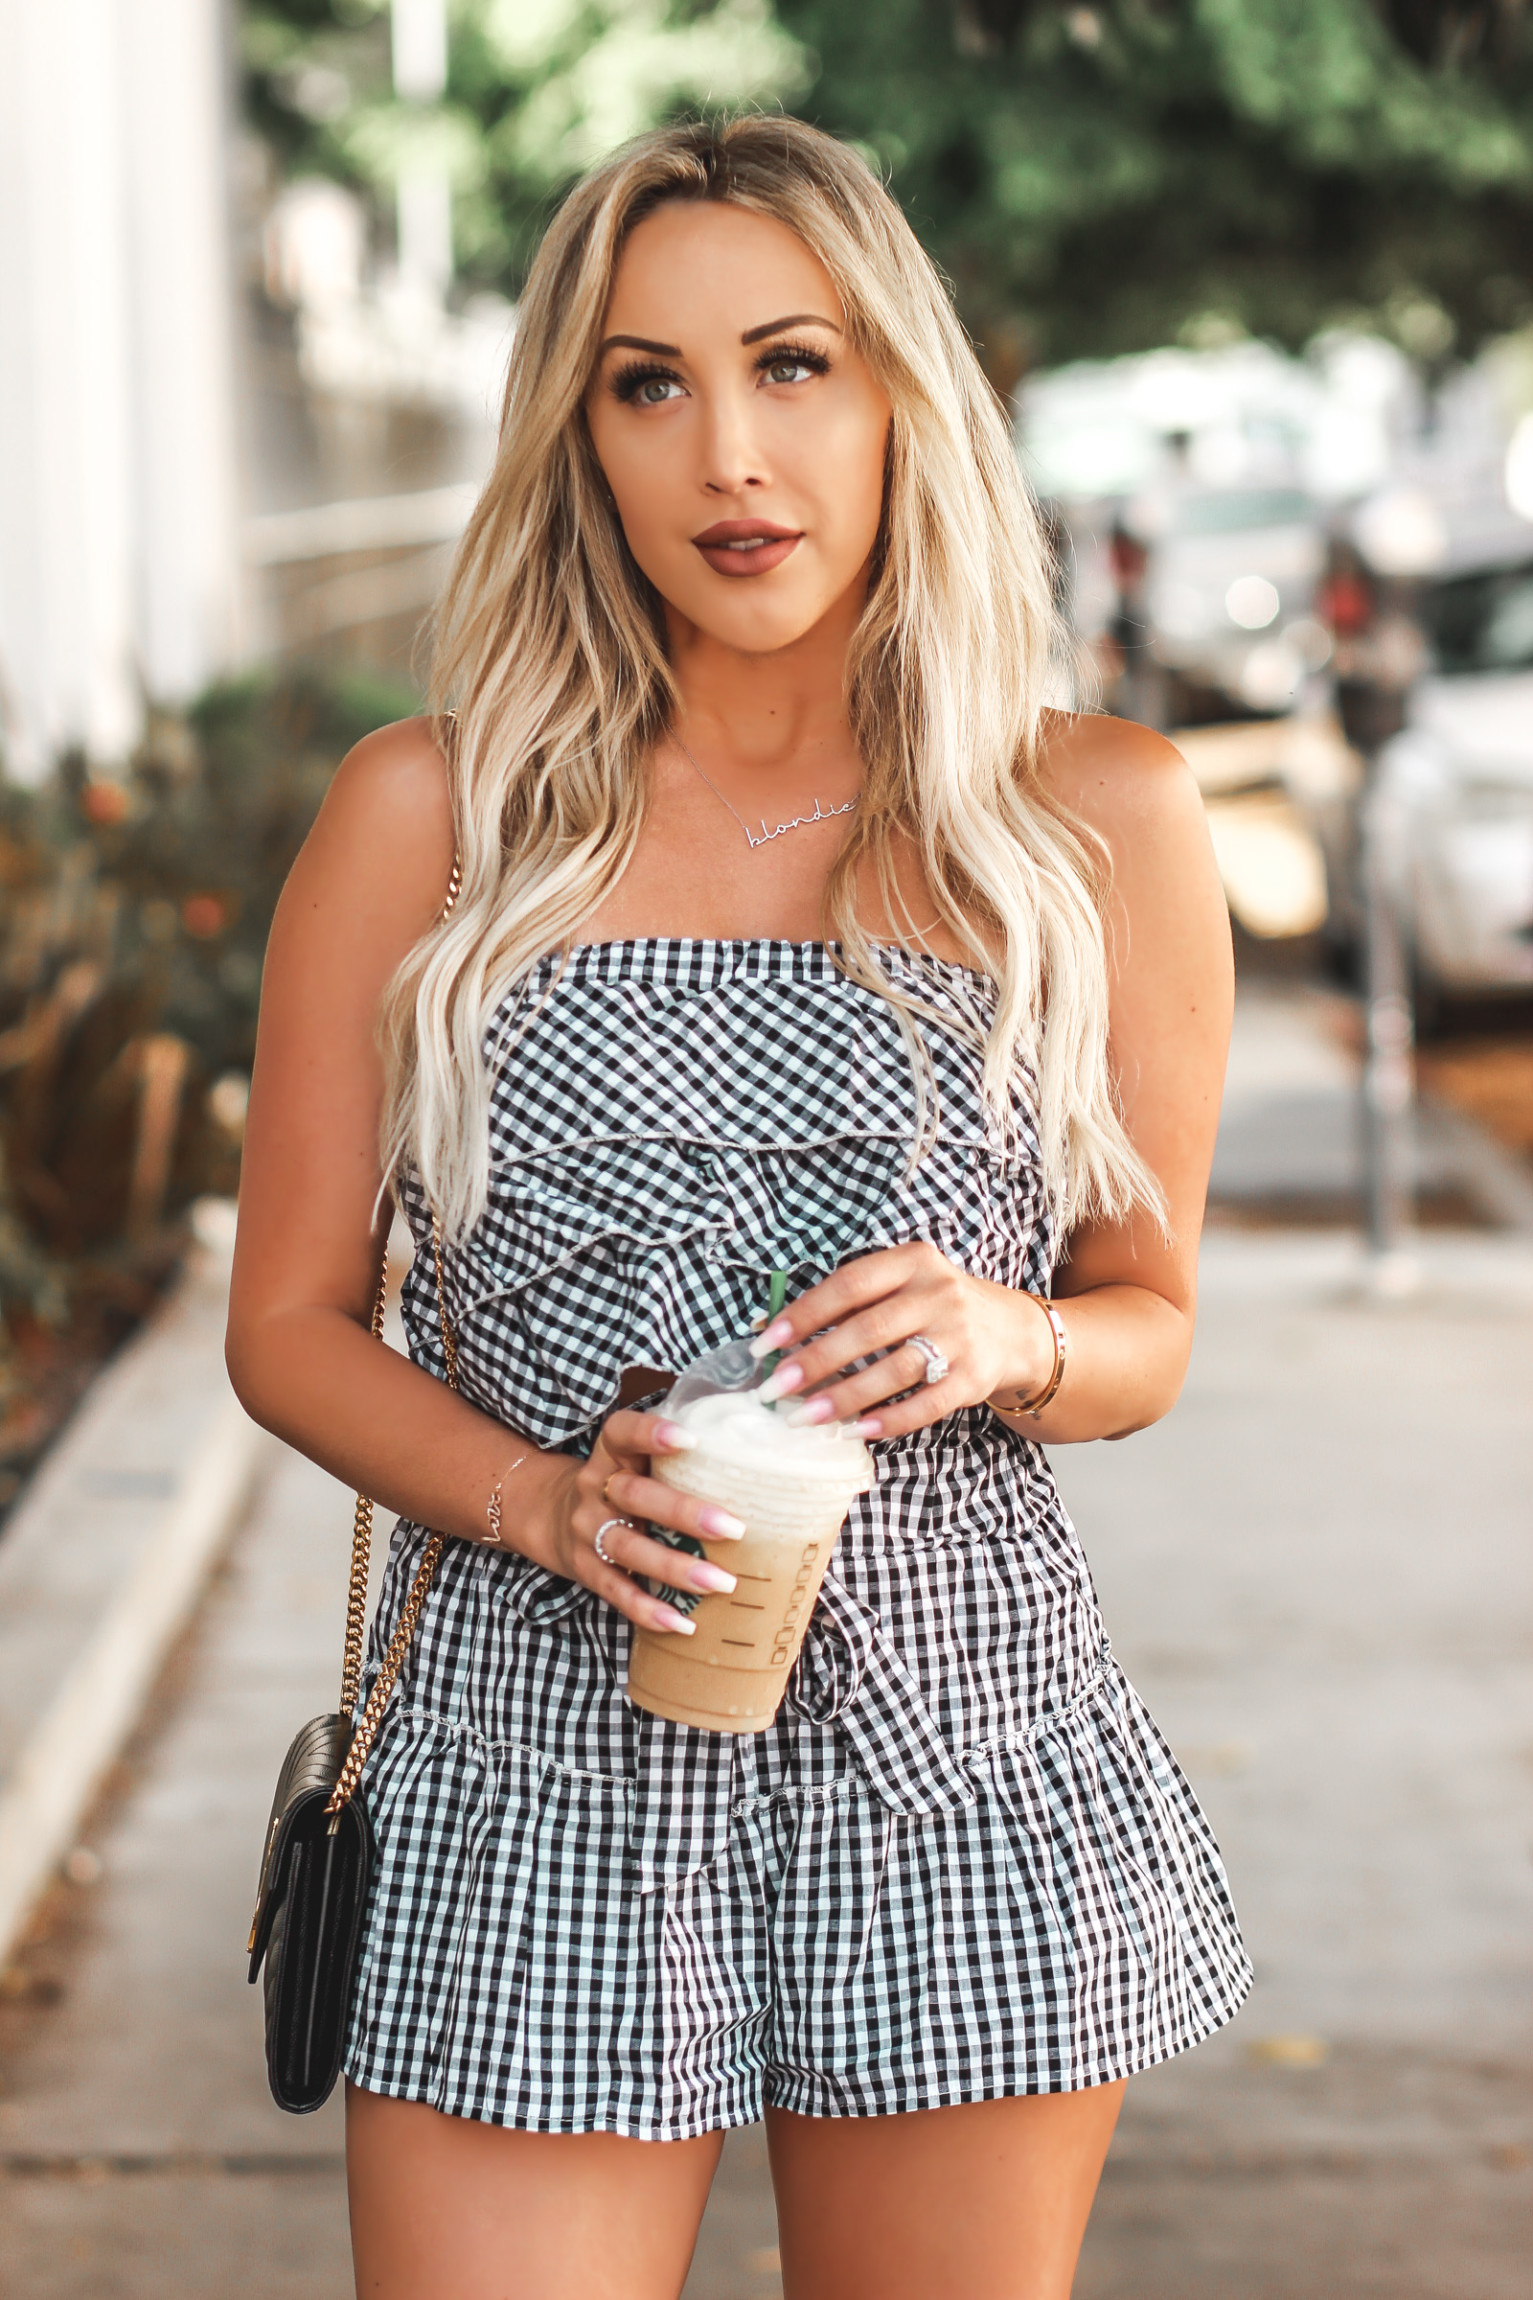 Two-Piece Gingham Style Set | Cute two-piece for summer | YSL Bag | Blondie in the City by Hayley Larue